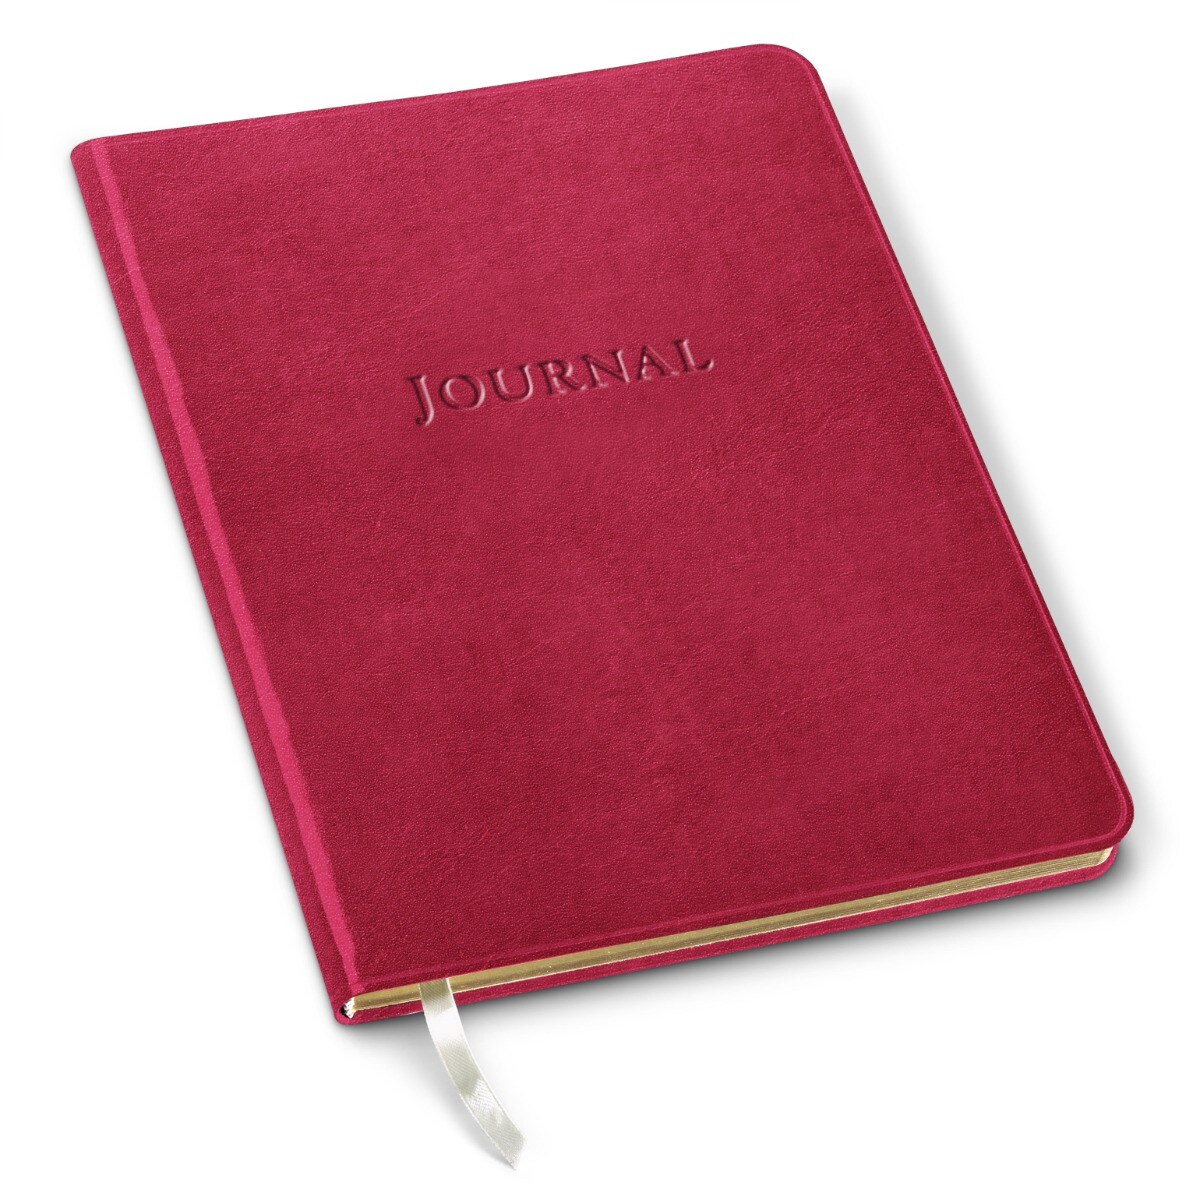 Large Leather Journal by Gallery Leather - 9.75"x7.5"